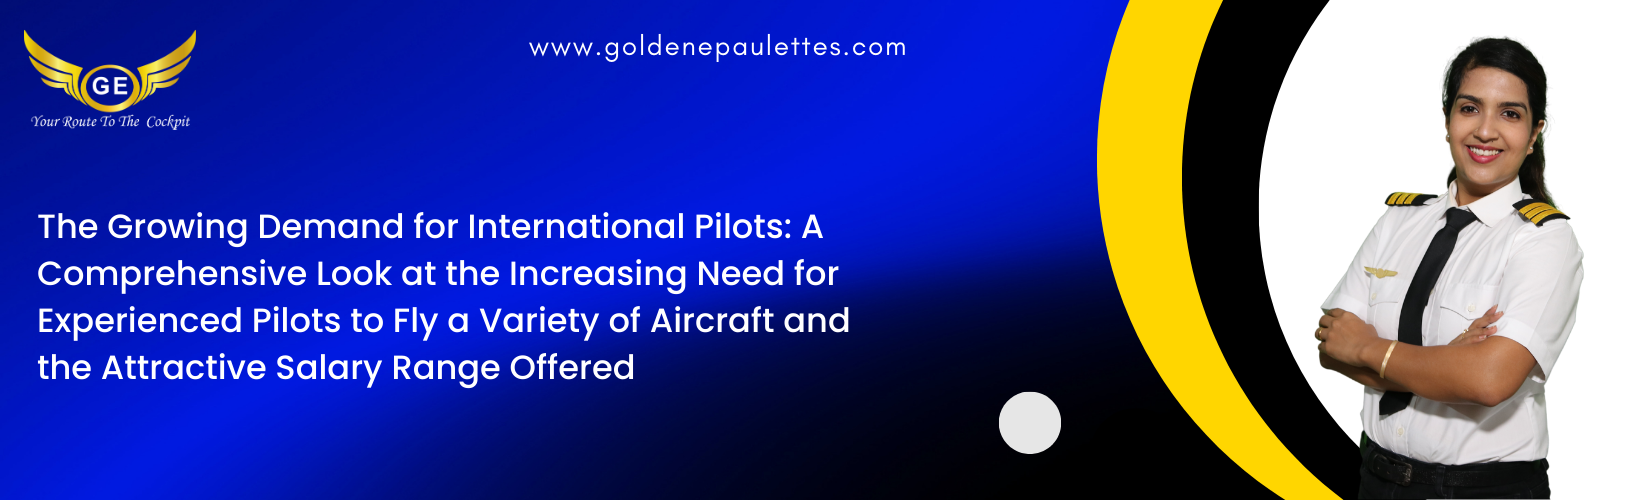 The Growing Demand for International Pilots